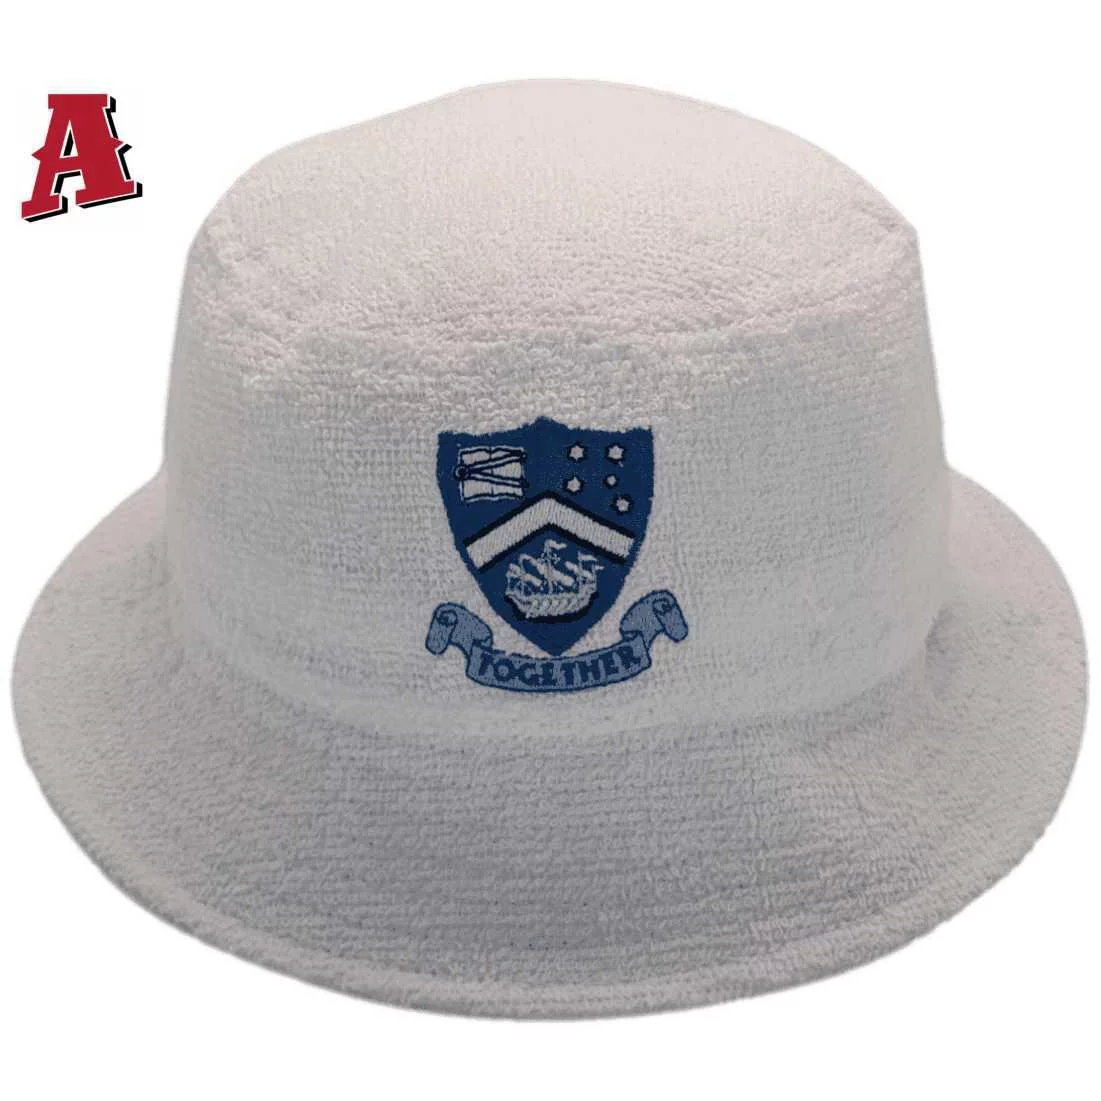 The Women's College Carillion Ave Newtown NSW Terry Toweling Aussie Bucket Hat Fitted 58cm 5.5cm Brim White